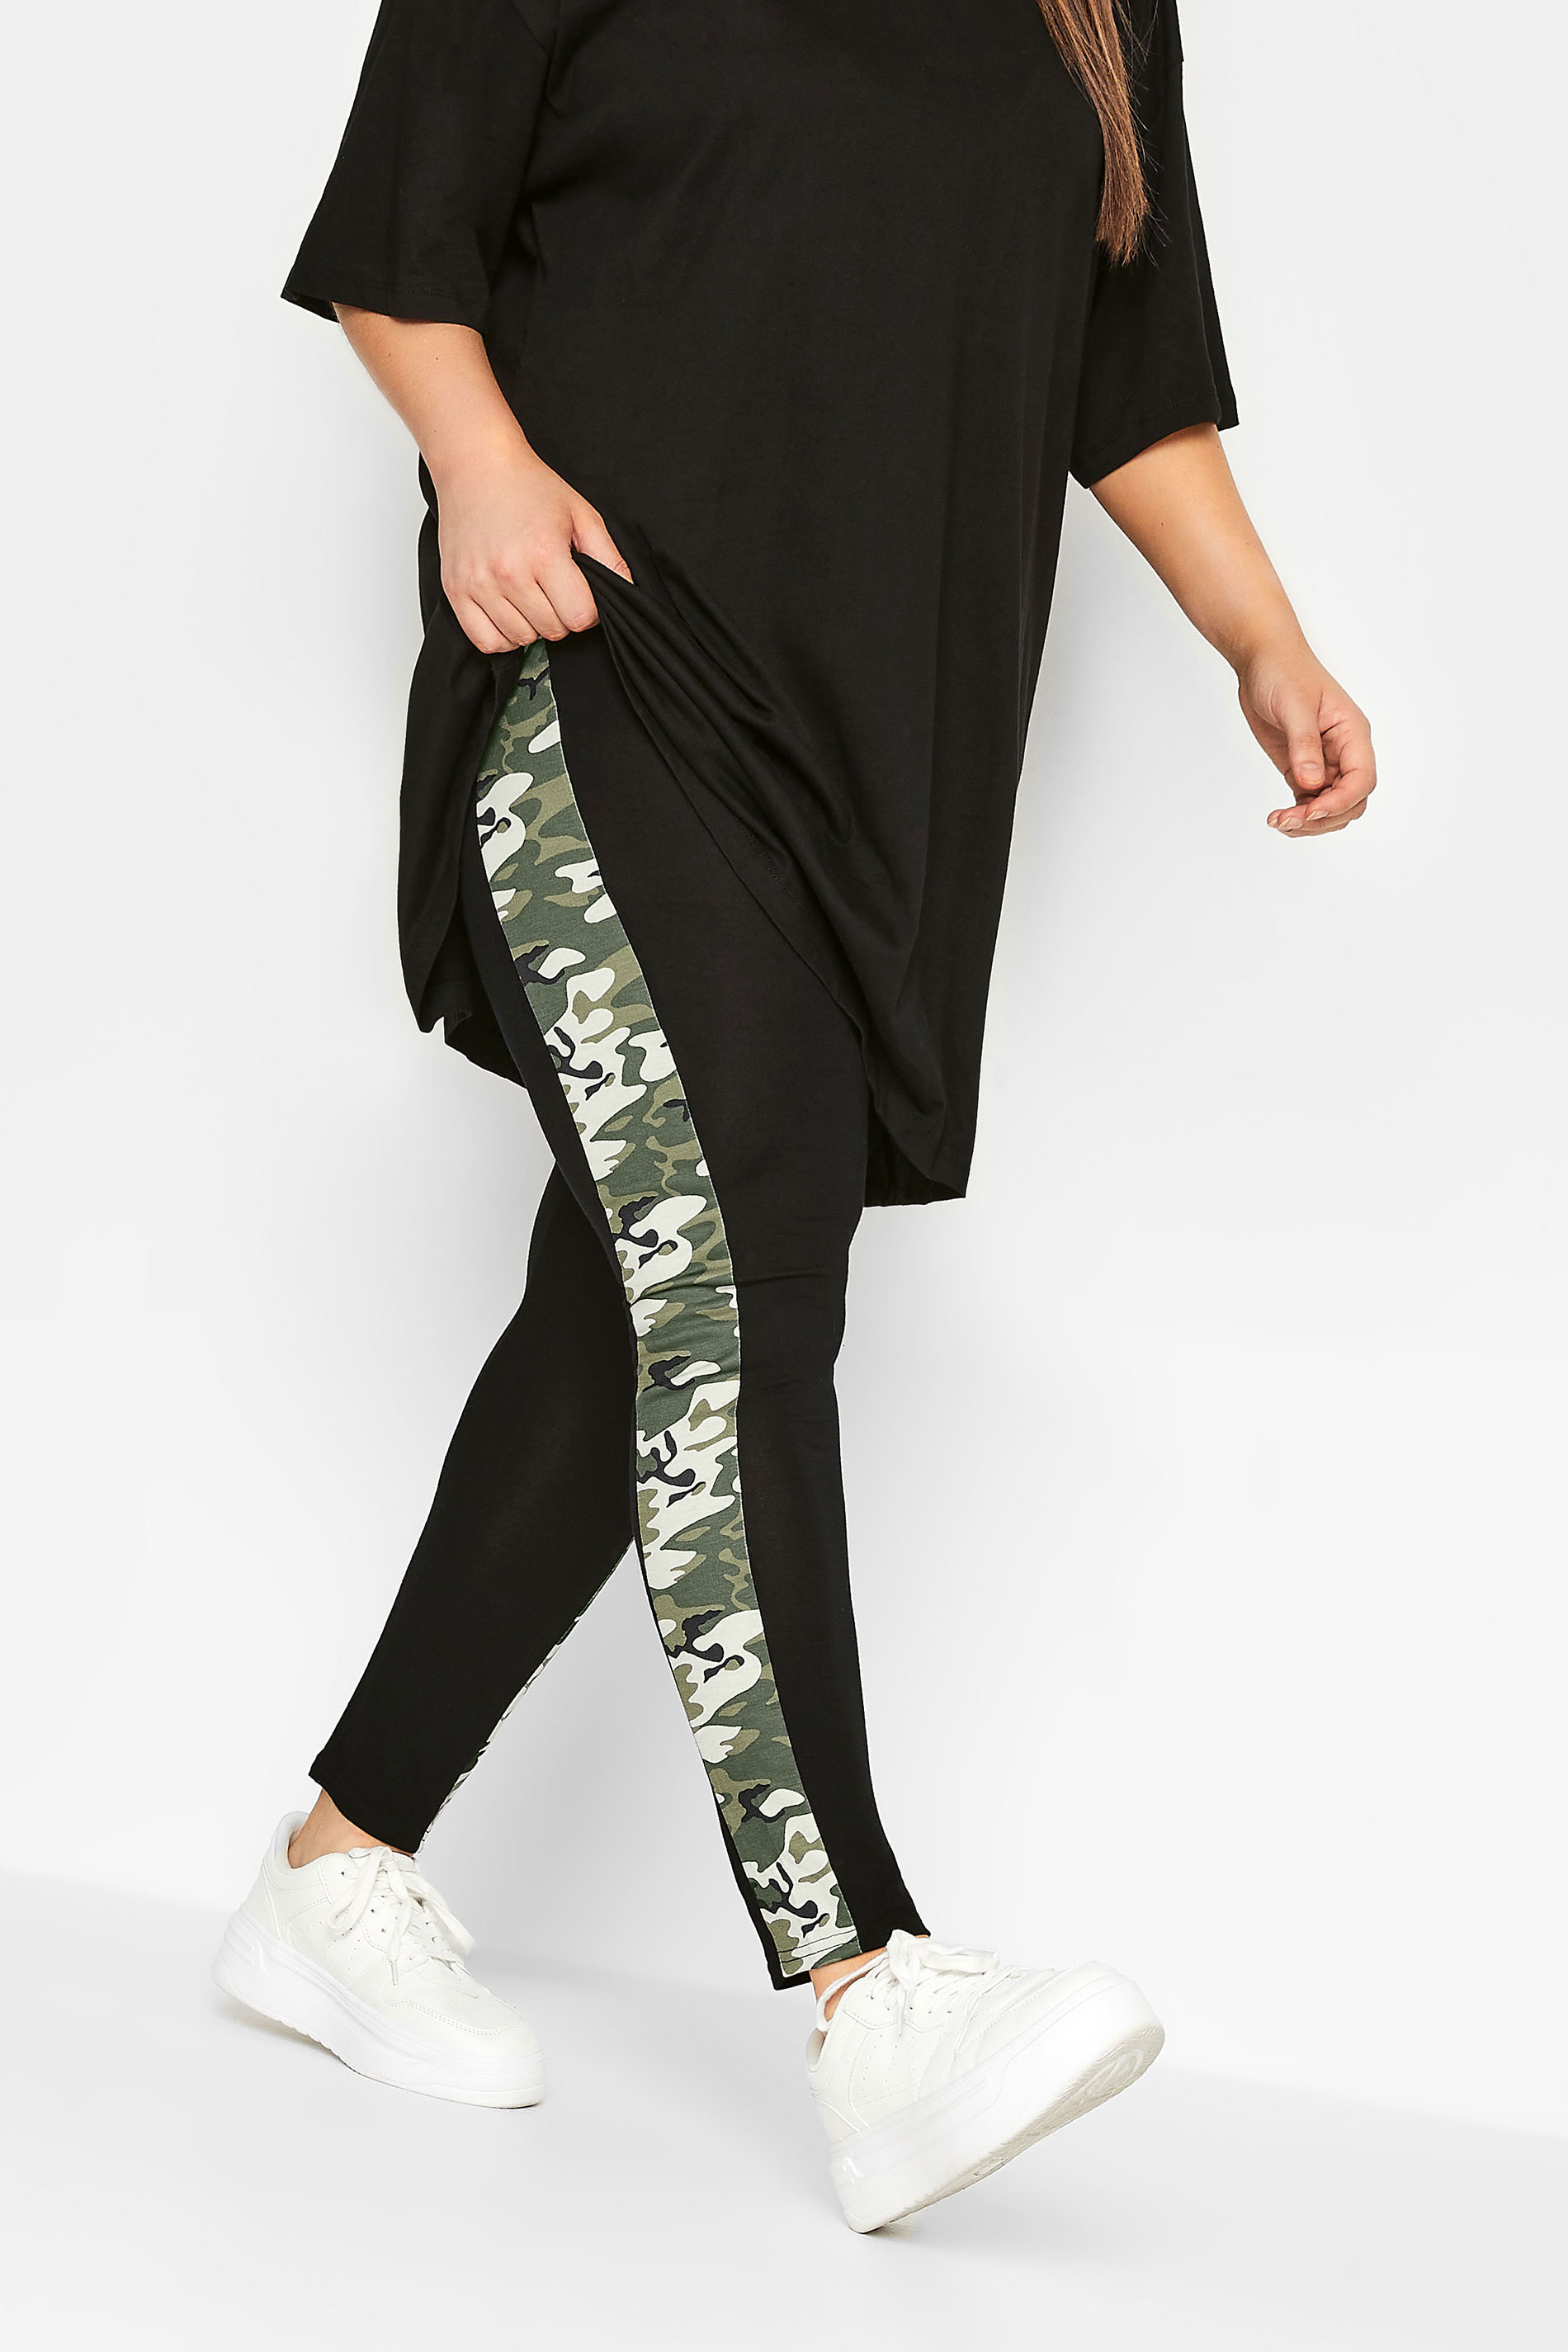 LIMITED COLLECTION Plus Size Black & Green Camo Side Panel Leggings